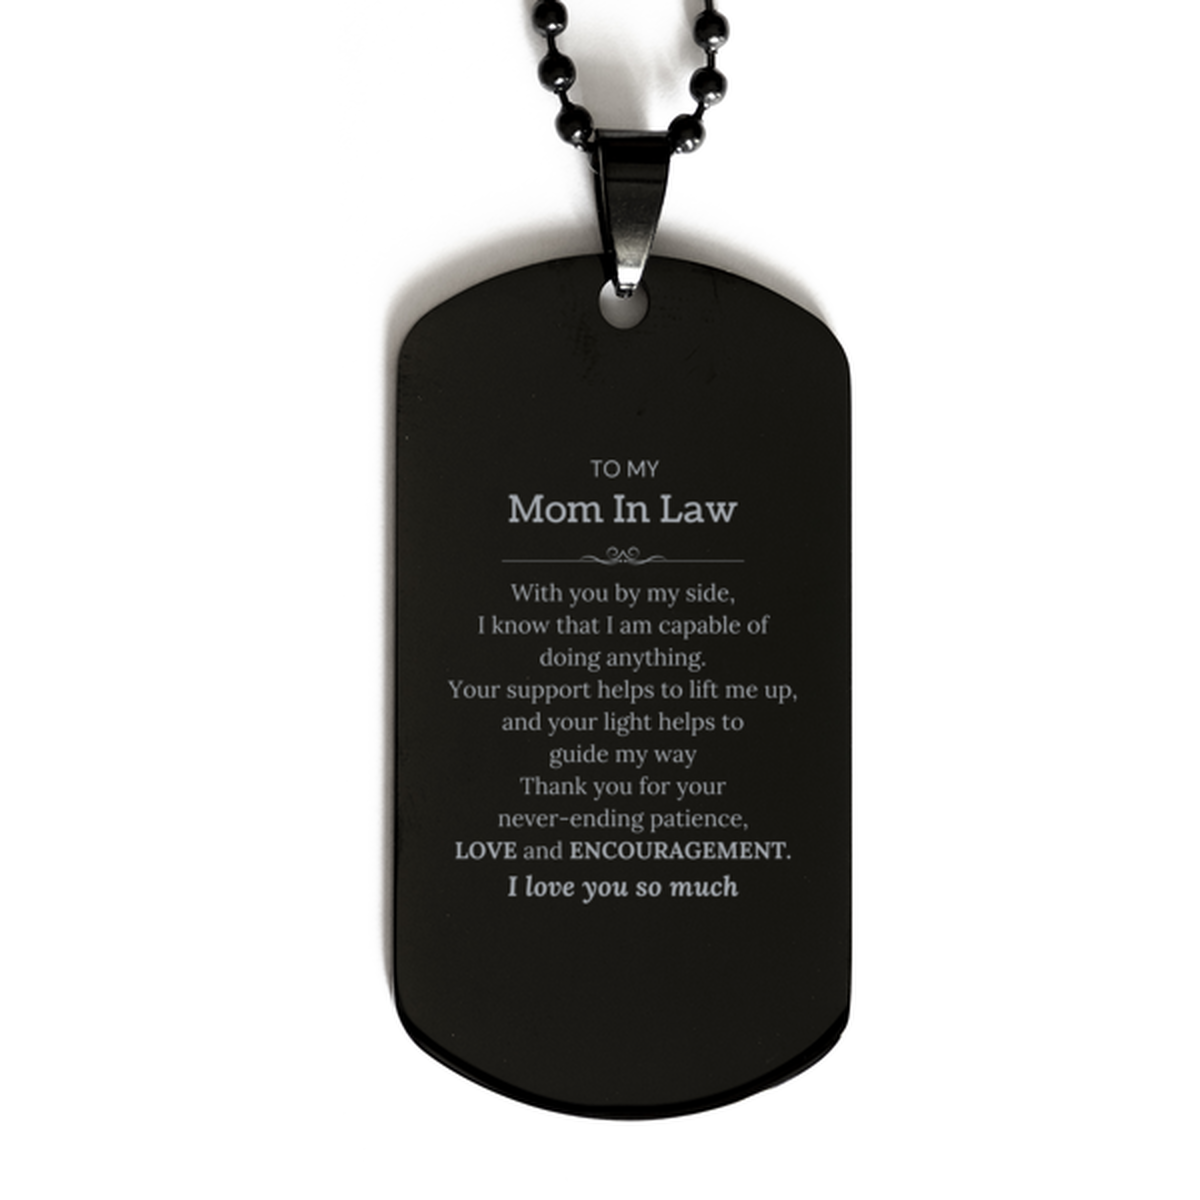 Appreciation Mom In Law Black Dog Tag Gifts, To My Mom In Law Birthday Christmas Wedding Keepsake Gifts for Mom In Law With you by my side, I know that I am capable of doing anything. I love you so much